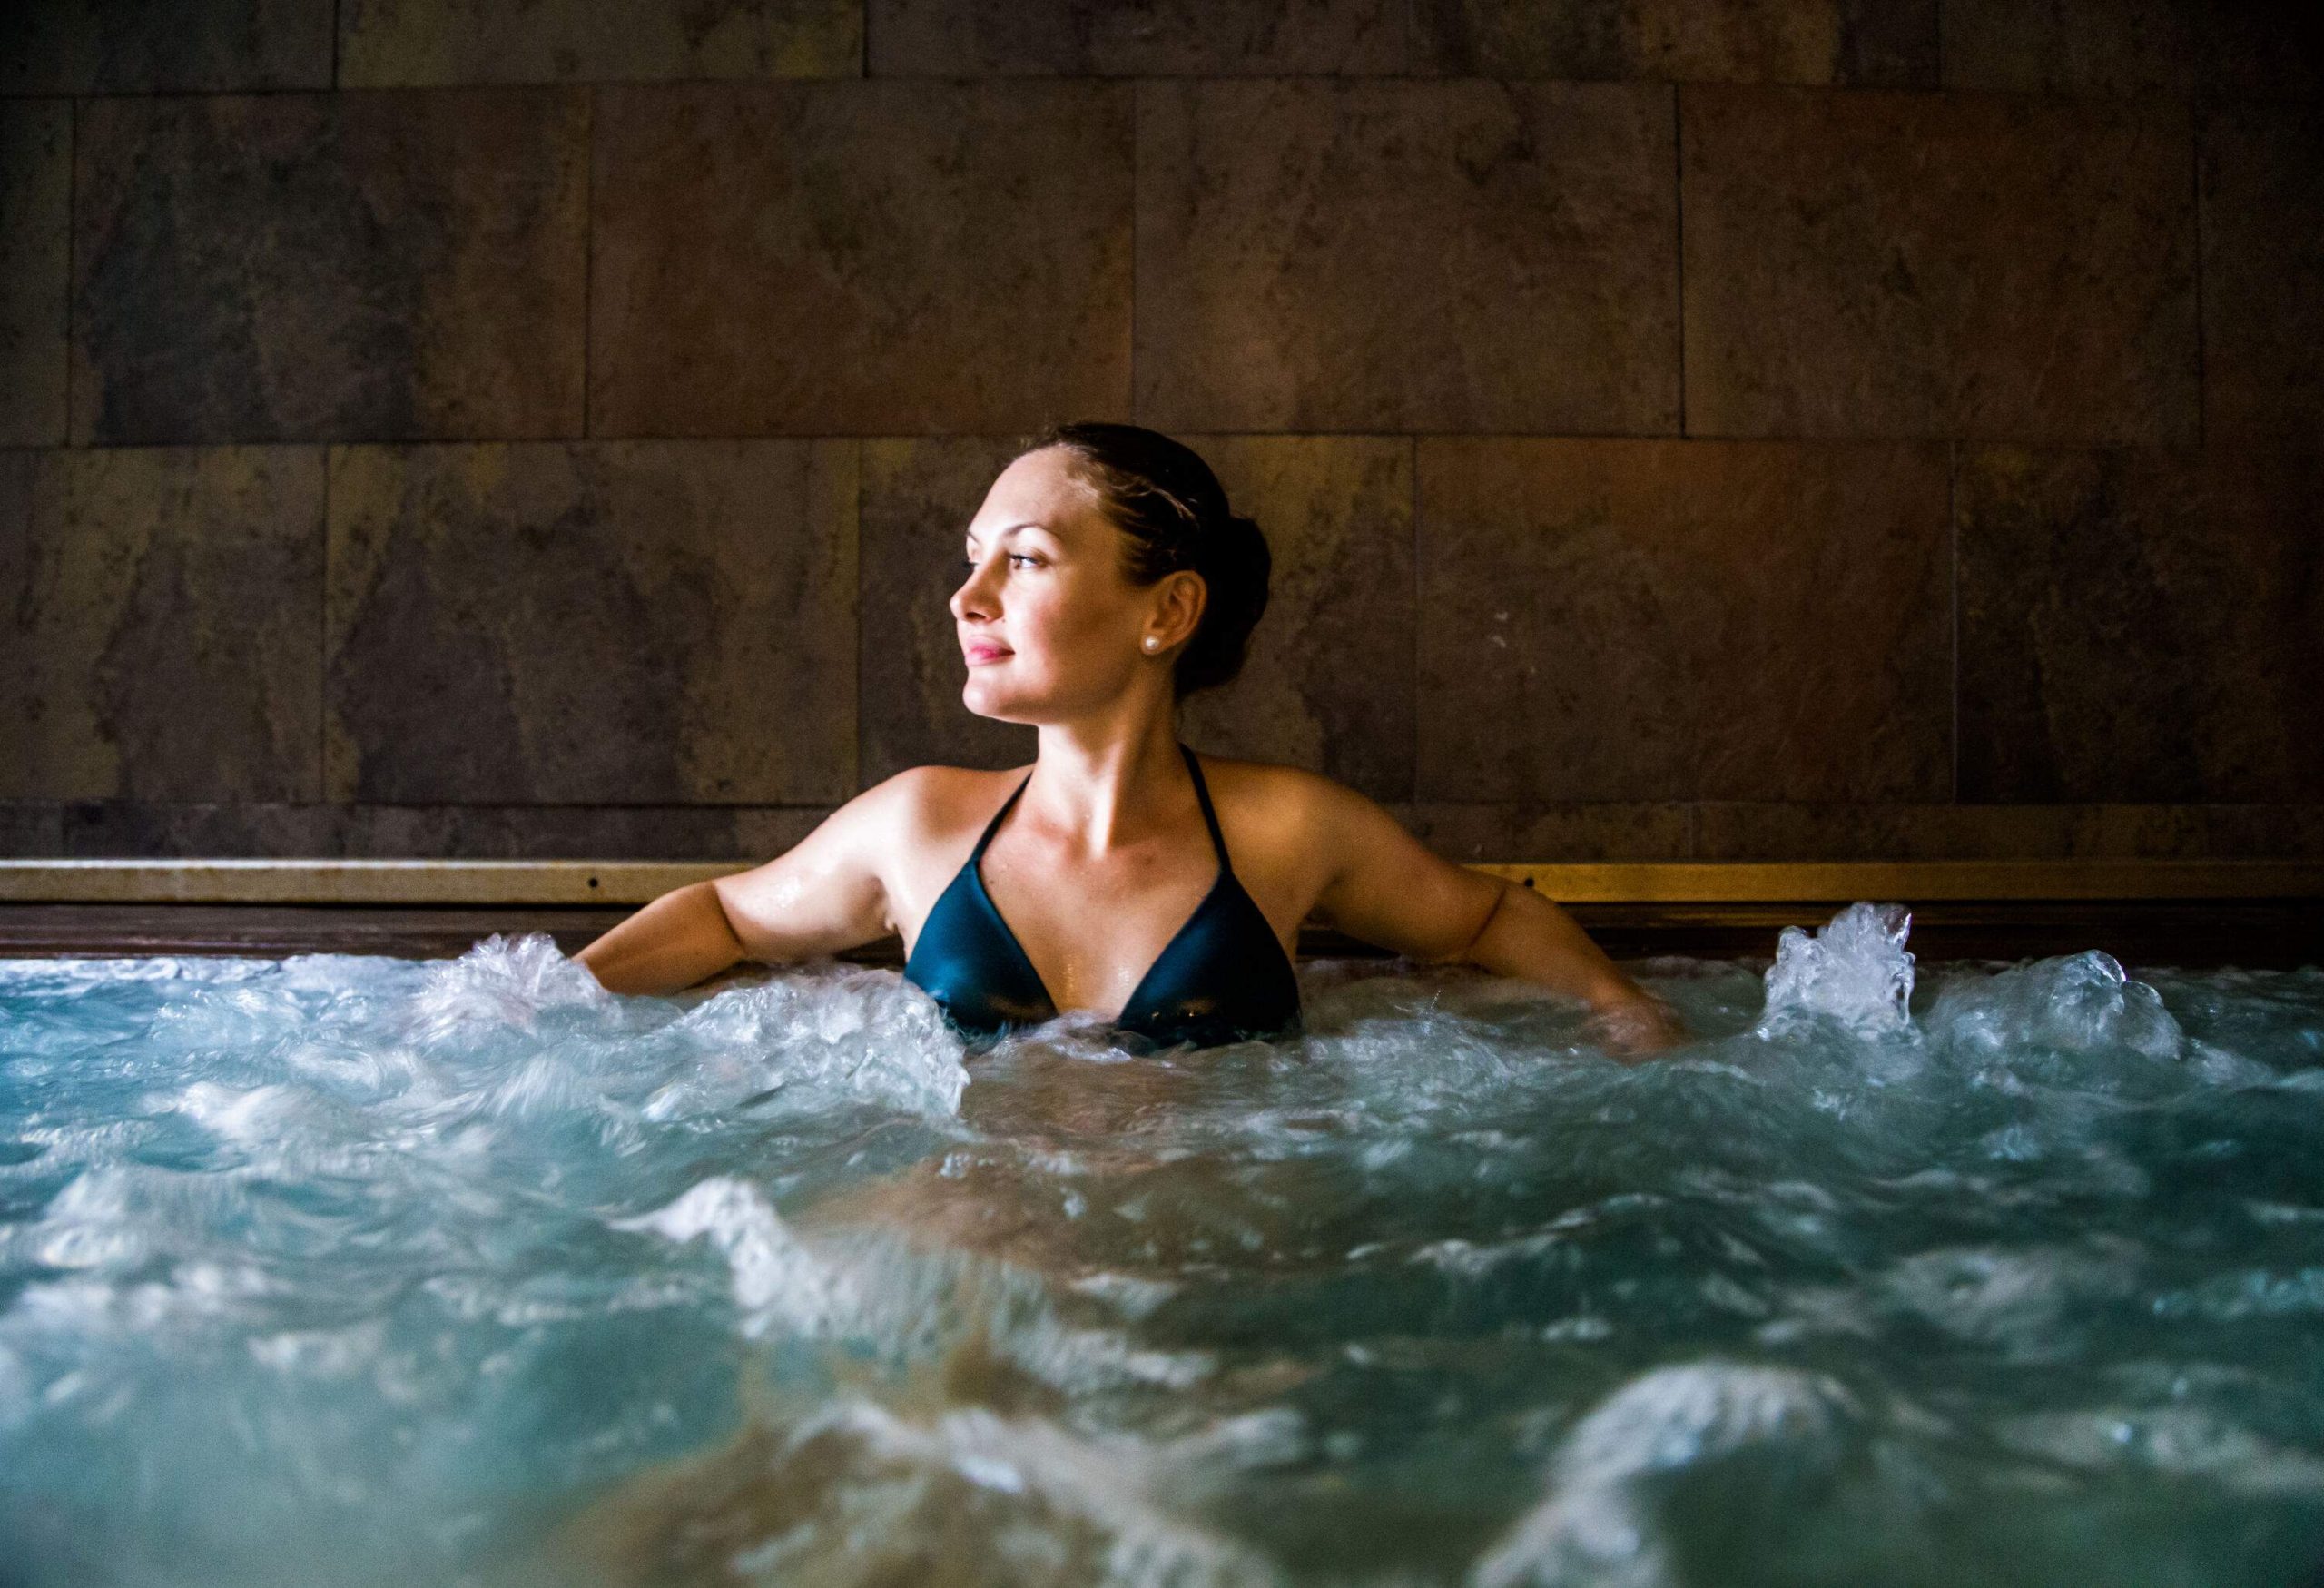 A woman leaning back against the edge of a jacuzzi, her body relaxed by the jetted water.